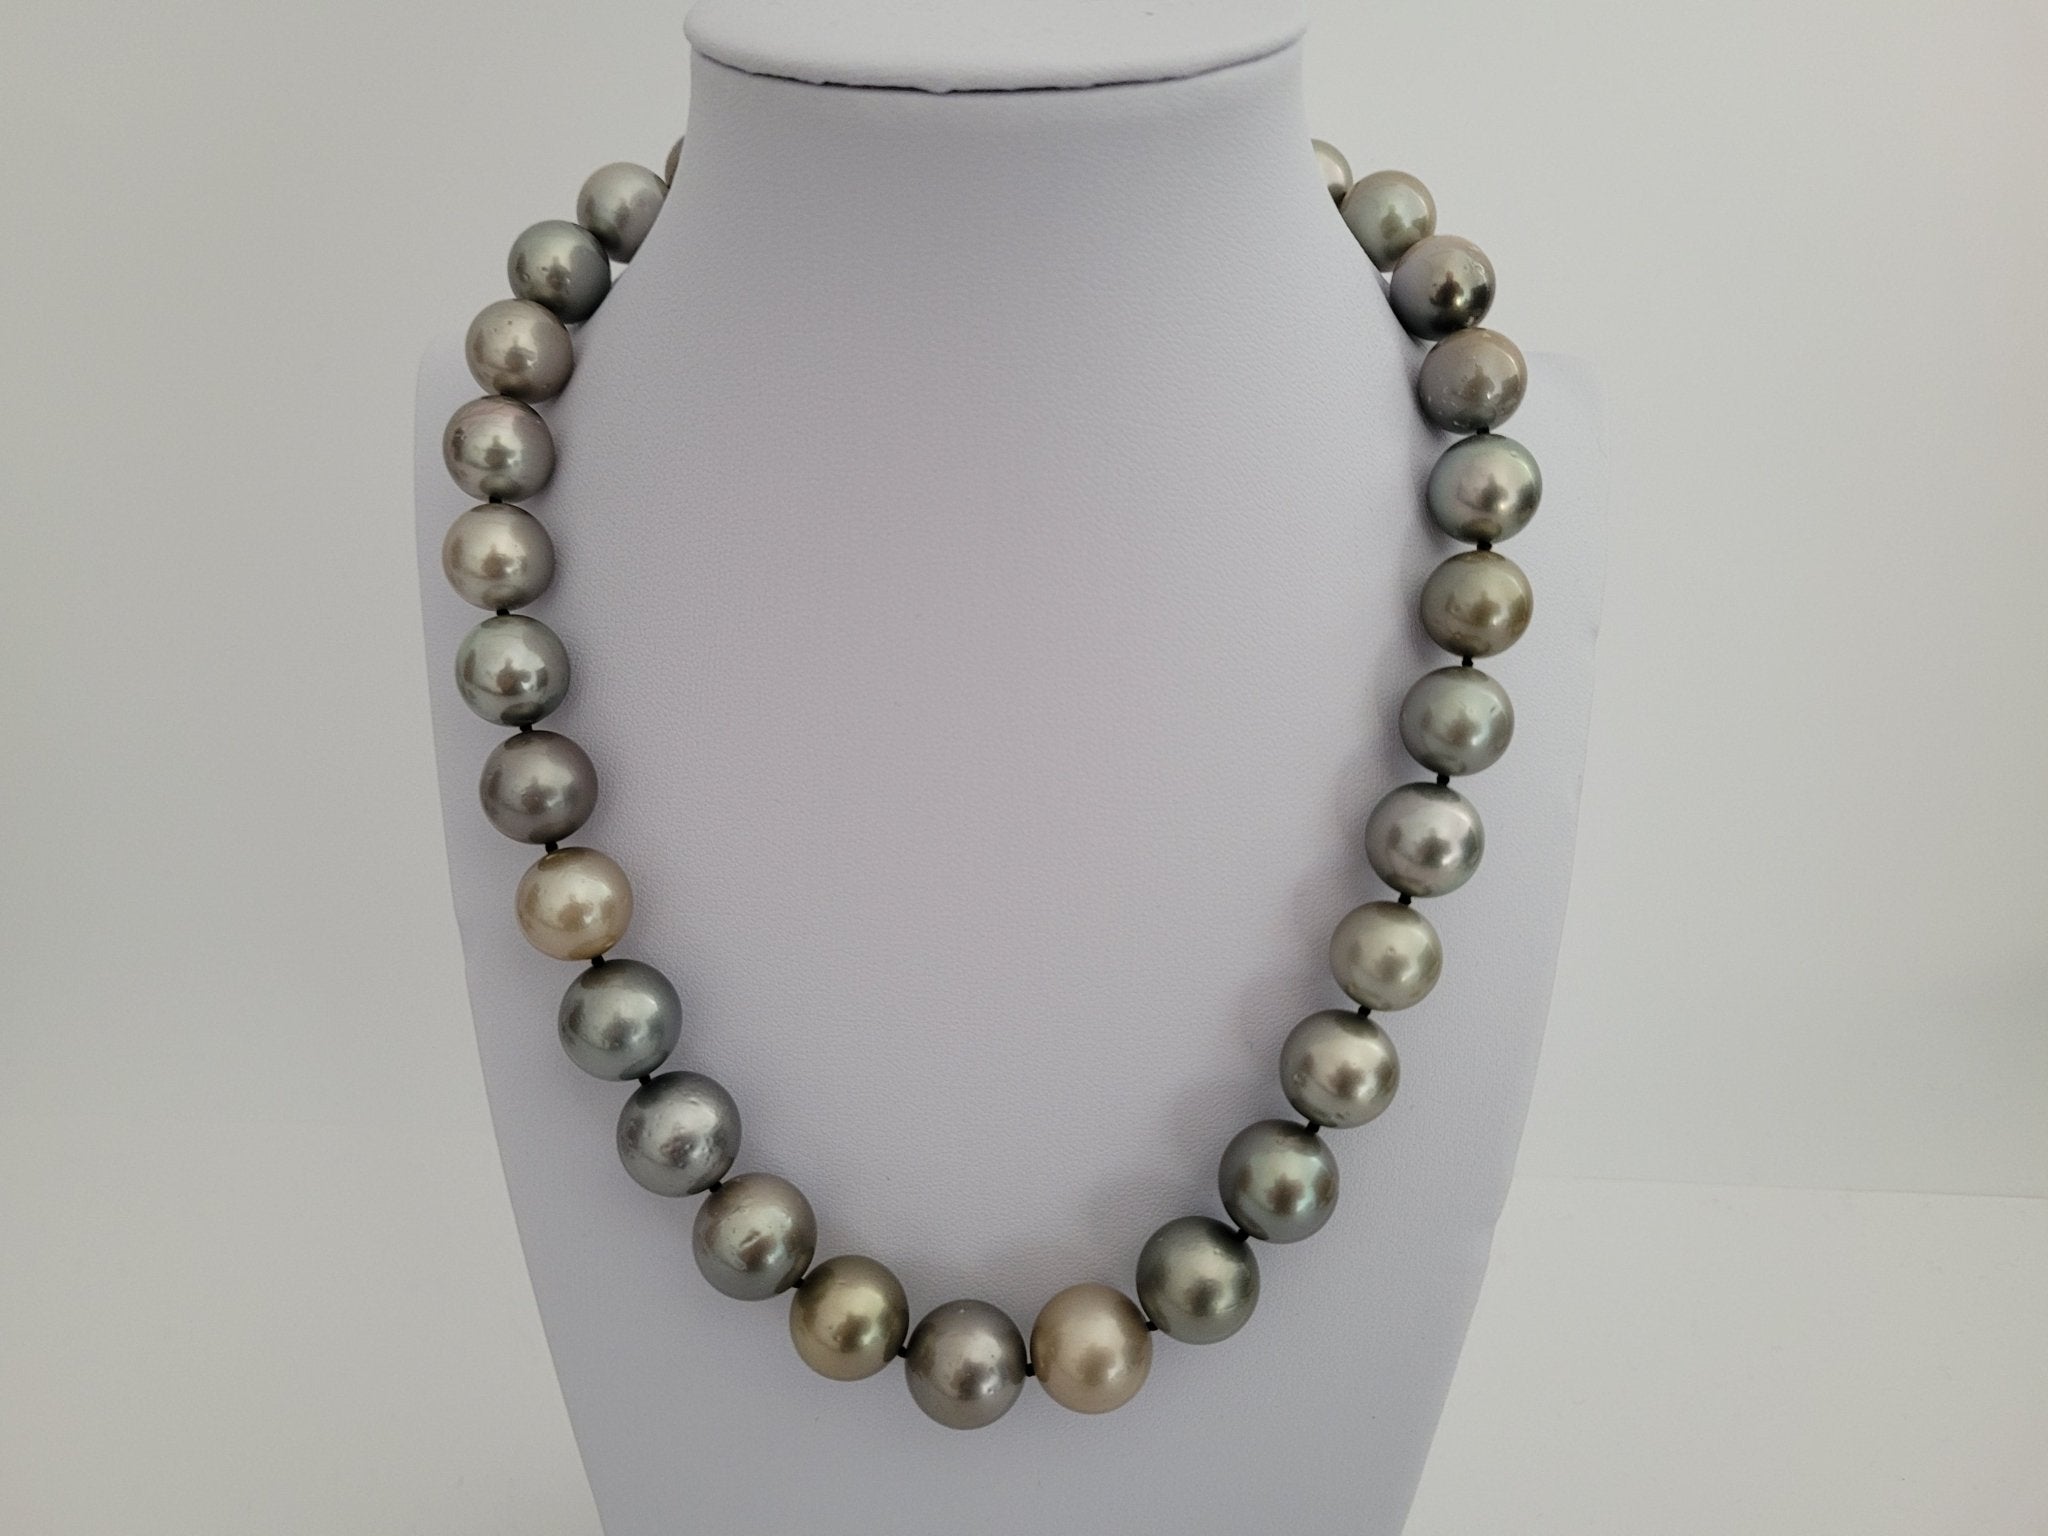 10-14mm South Sea Pearl Necklace in Peach and Grey, 19 Inches with Magnetic  Clasp